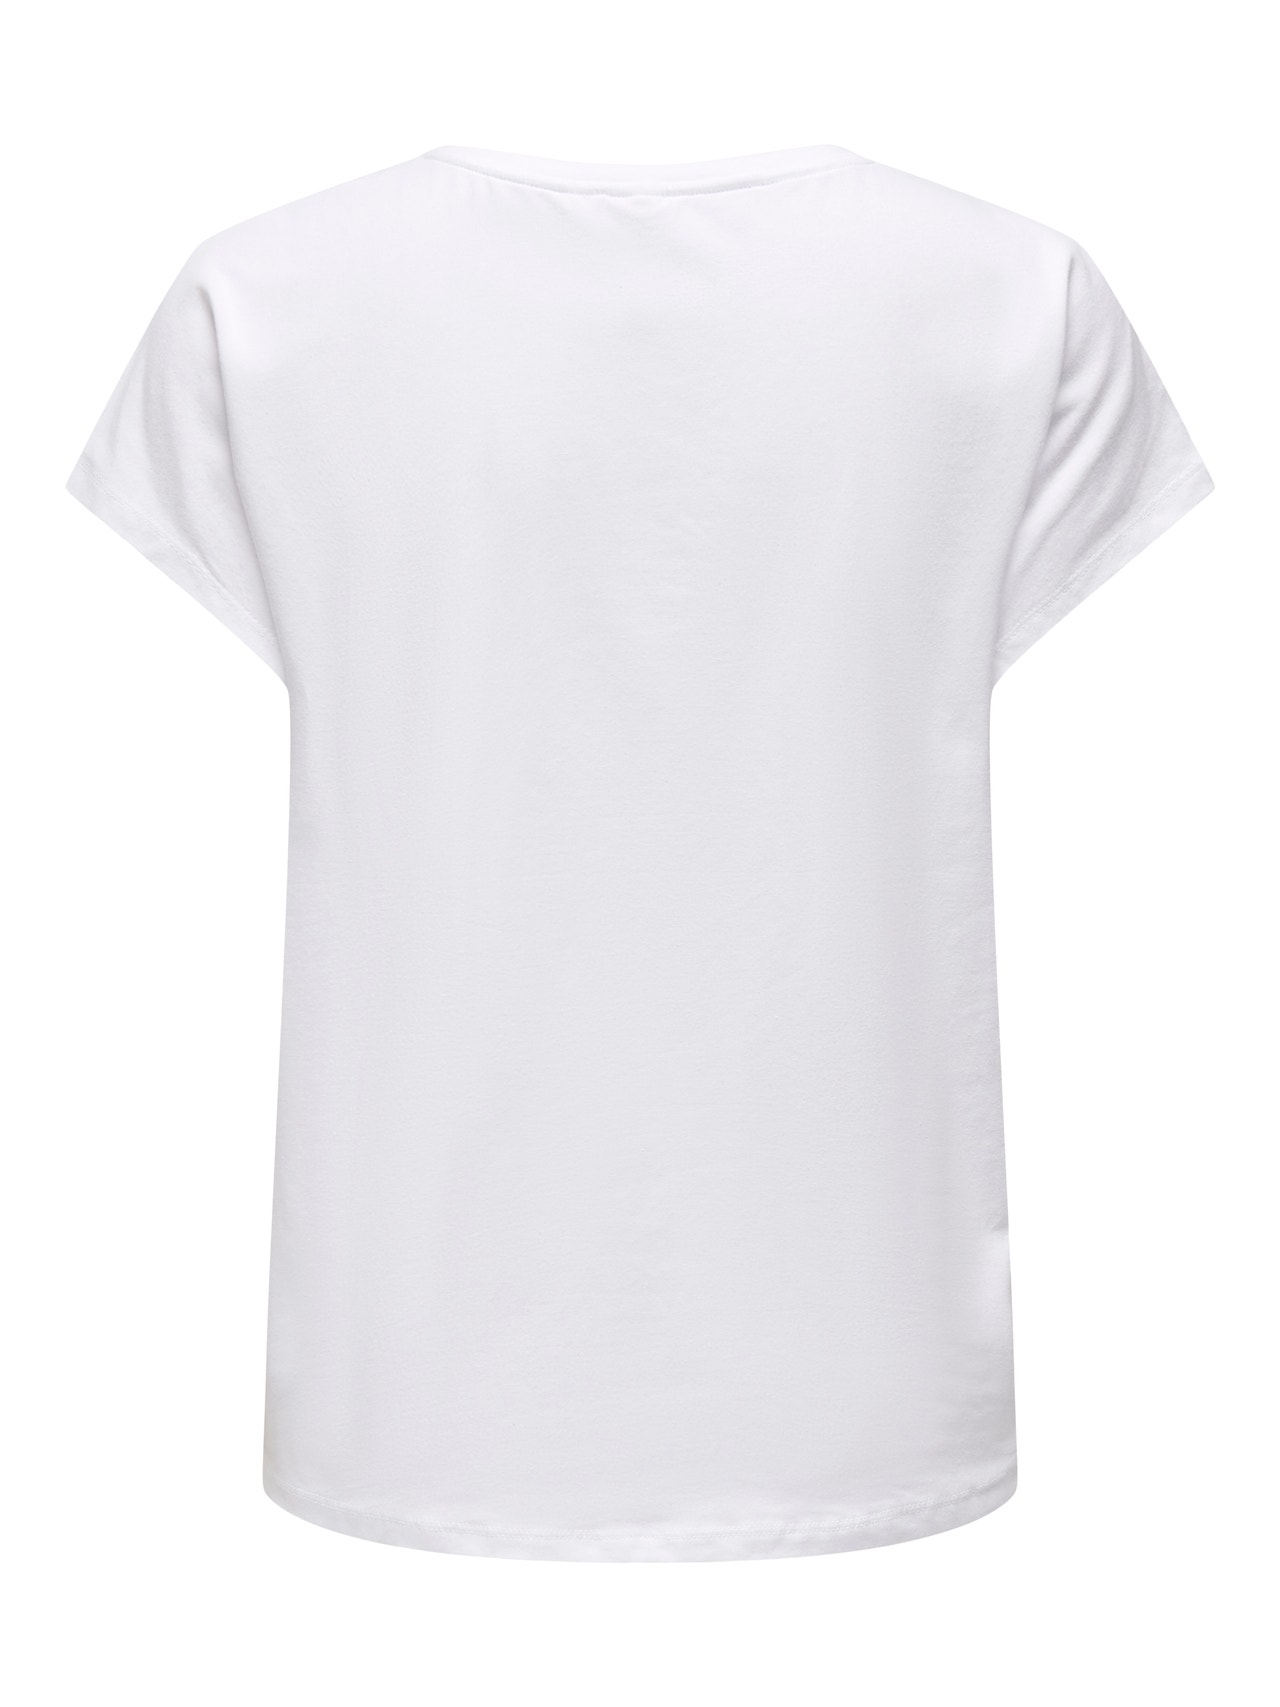 ONLY Loose Fit Round Neck Batwing sleeves T-Shirt -White - 15319353